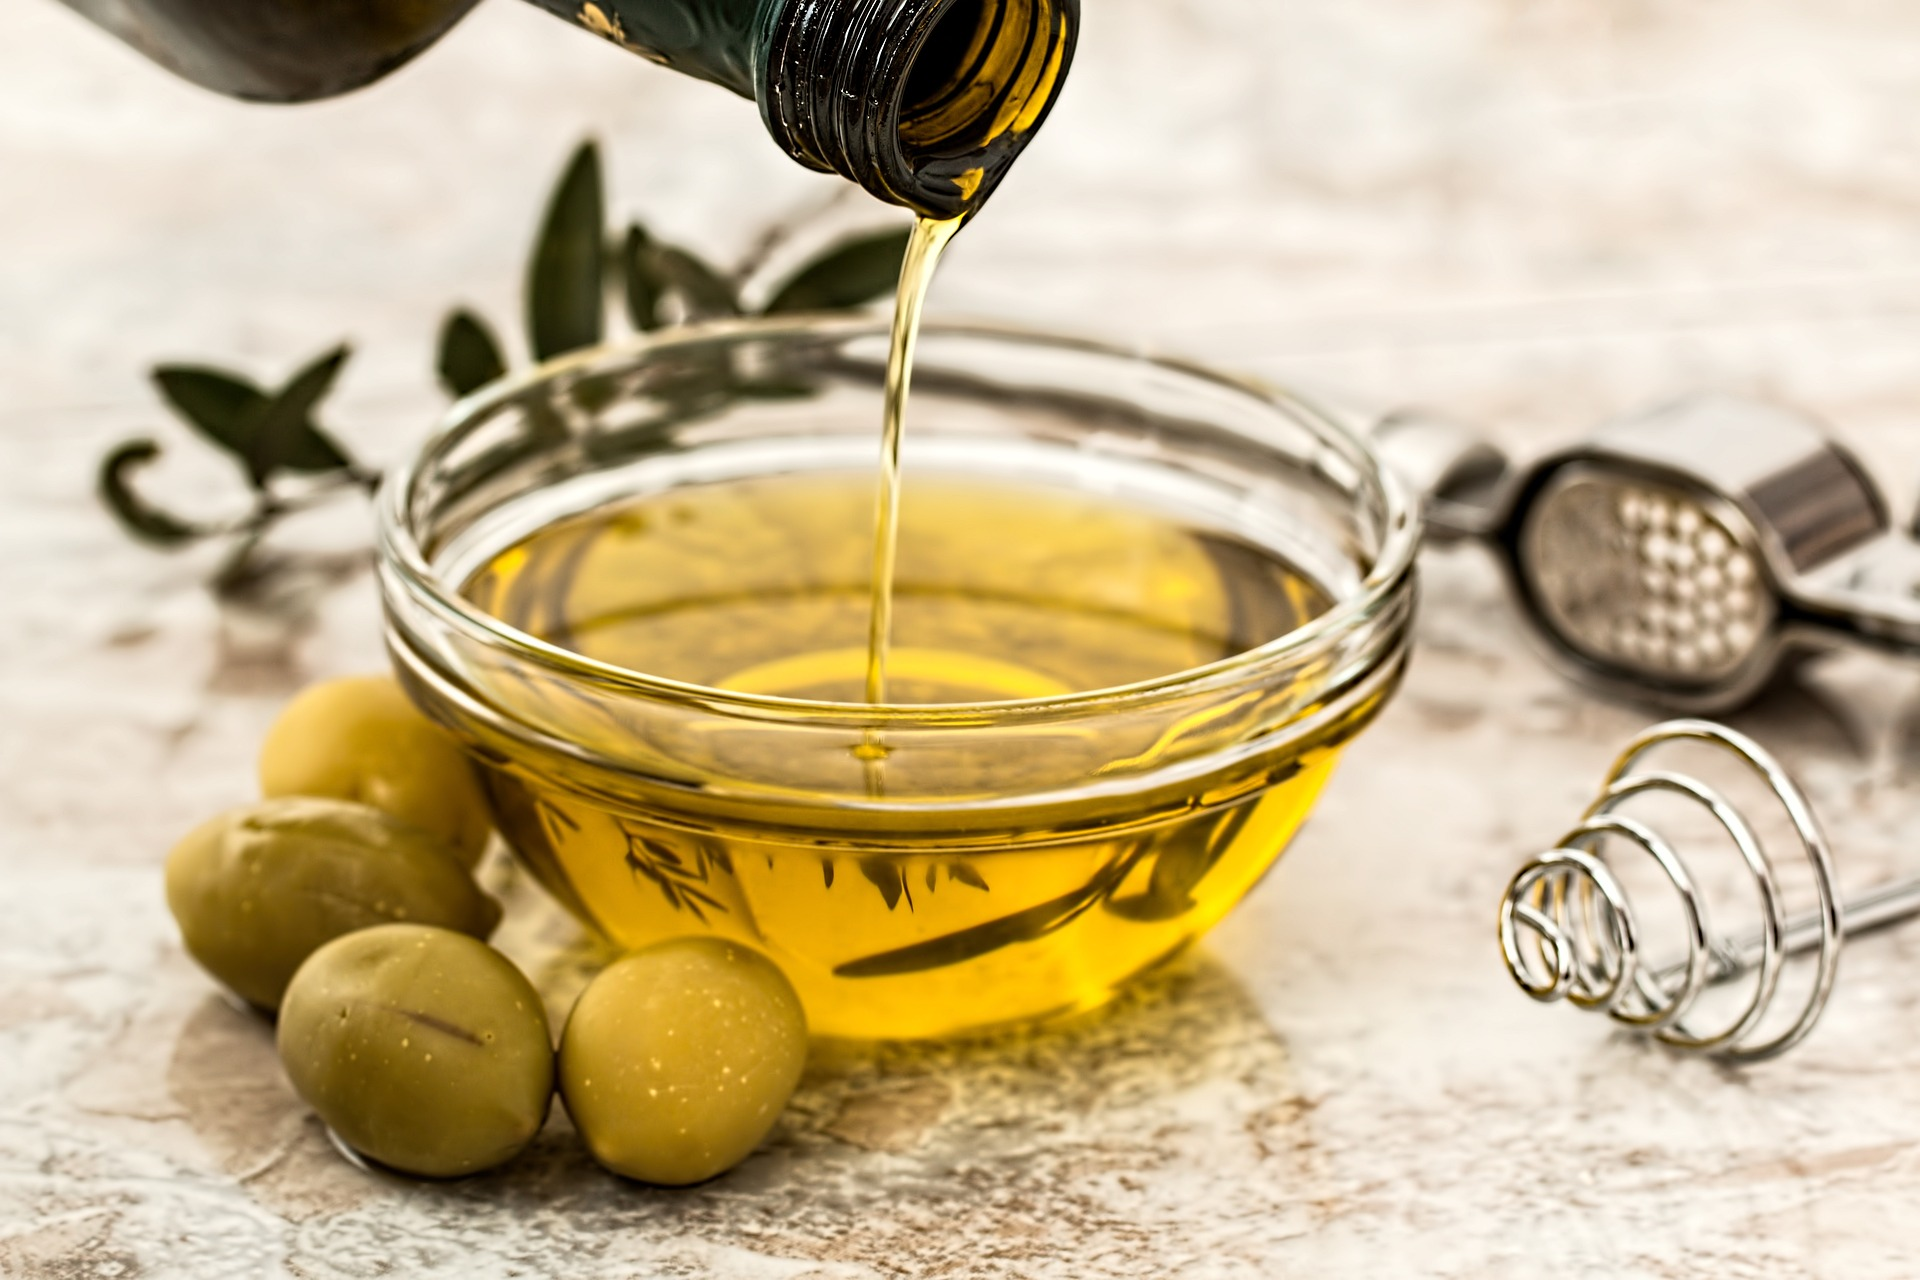 Olive oil: this is why its price has soared